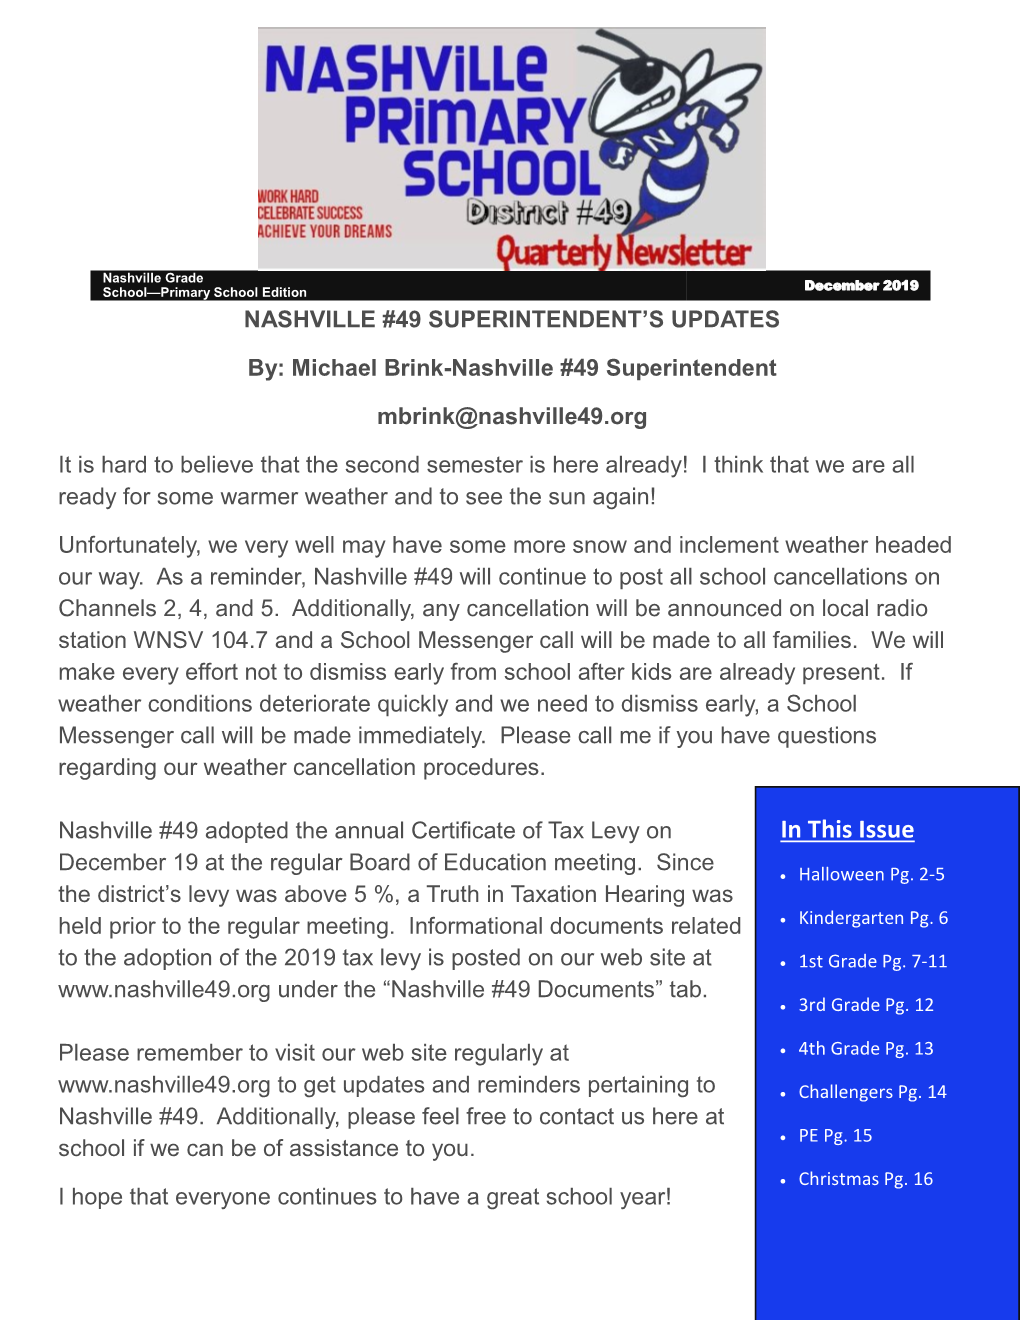 In This Issue December 19 at the Regular Board of Education Meeting